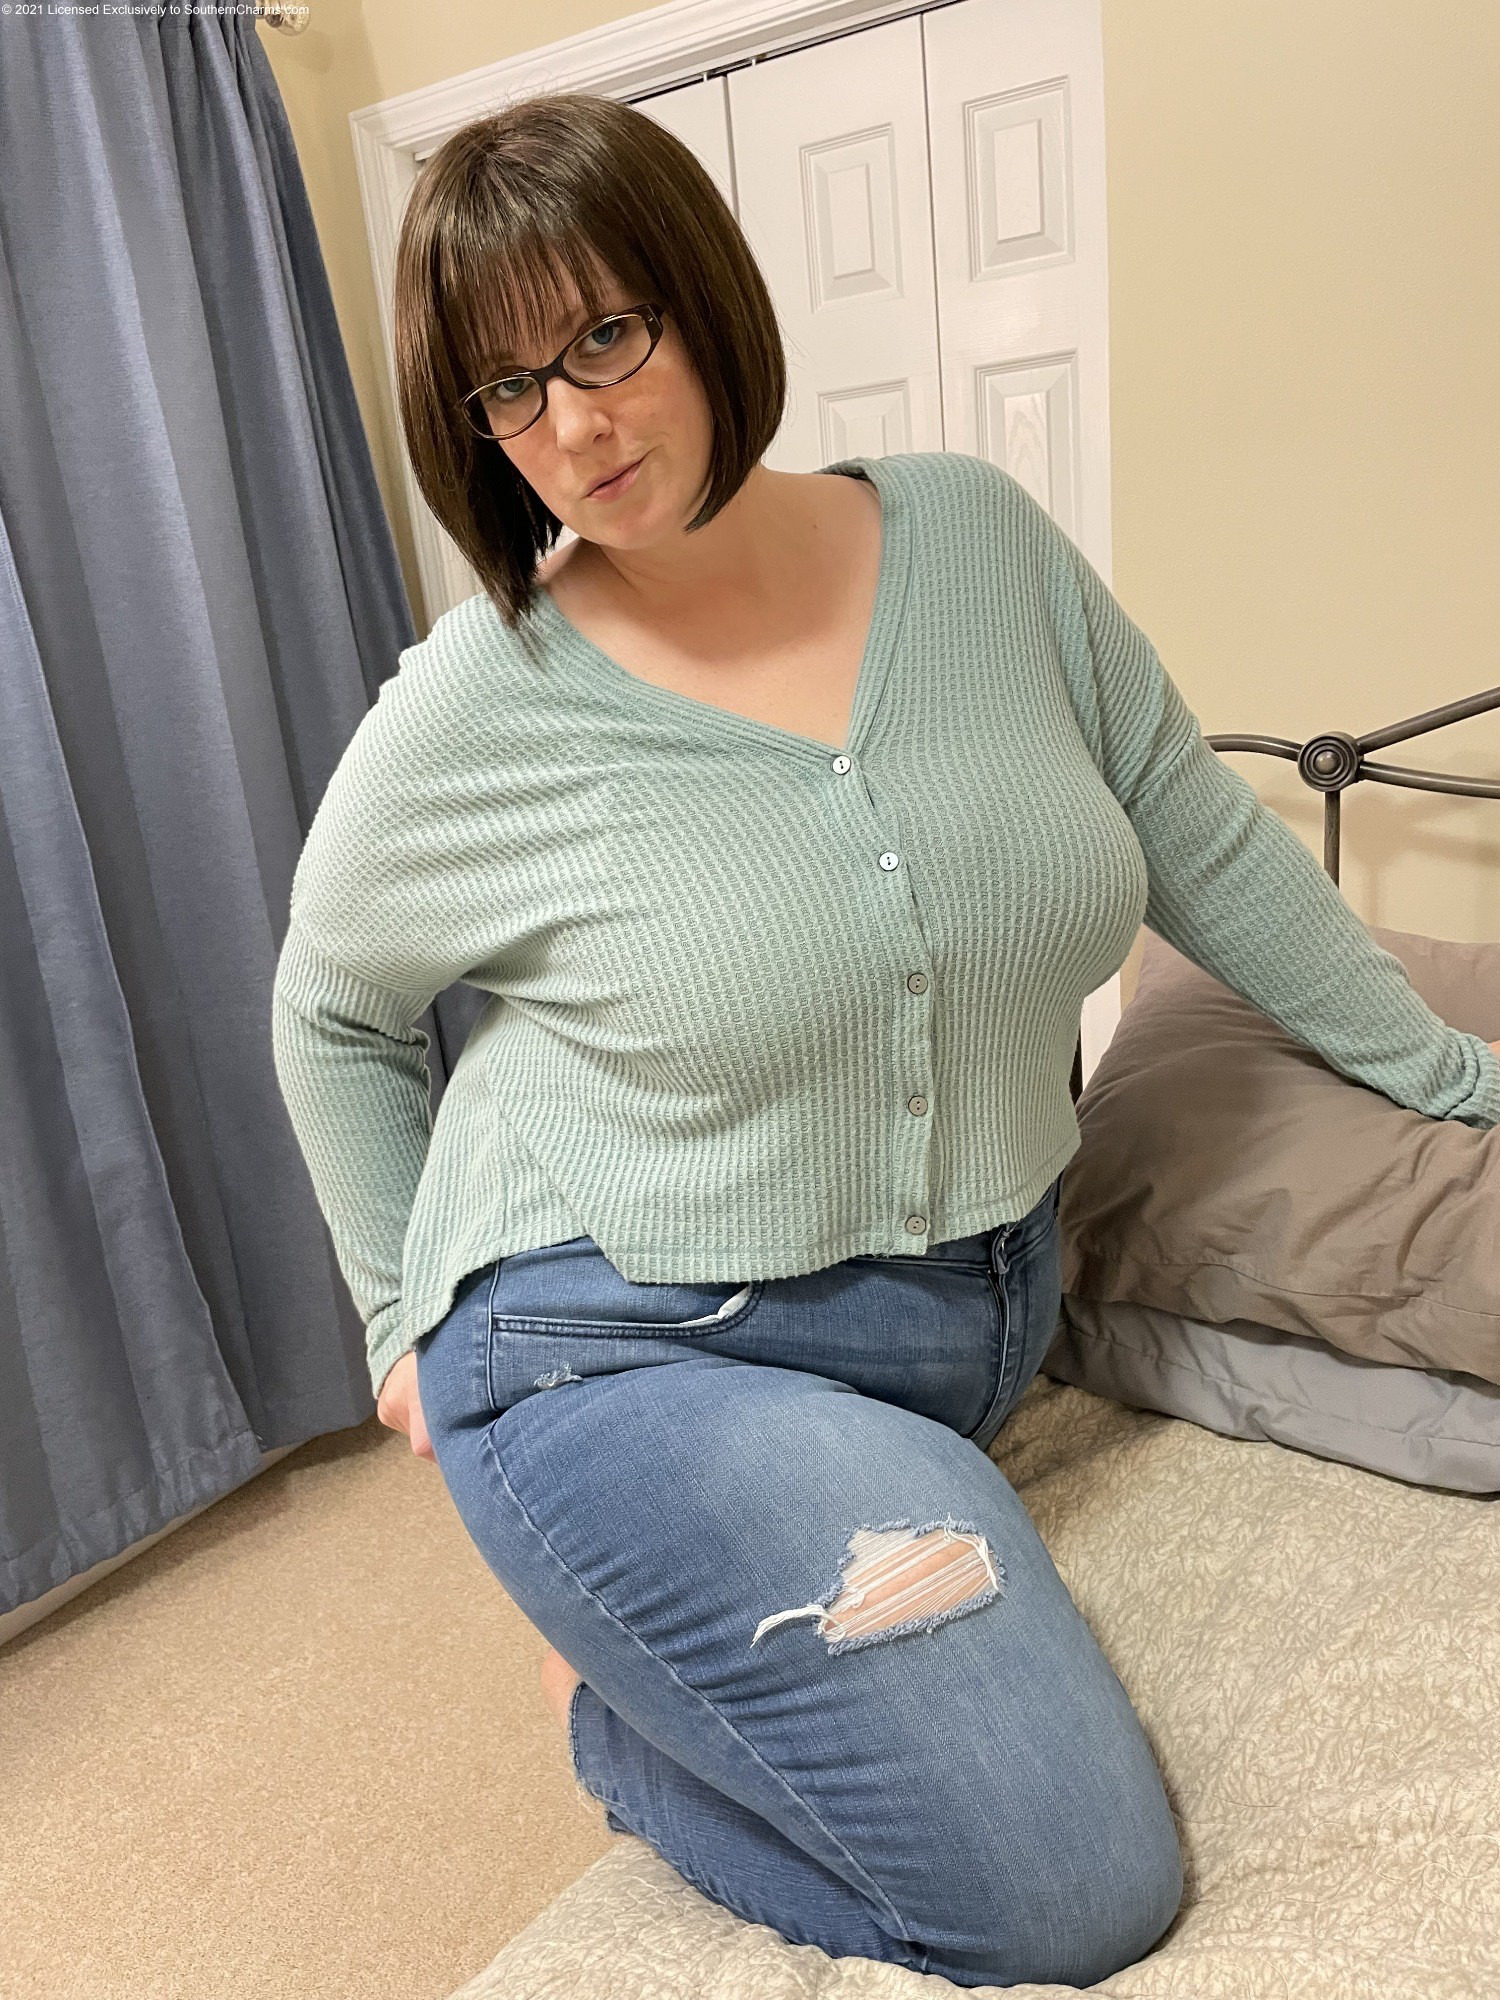 scorp69ion:hoosierbbwhooter-deactivated202:❤️‍🔥👖❤️‍🔥 adult photos